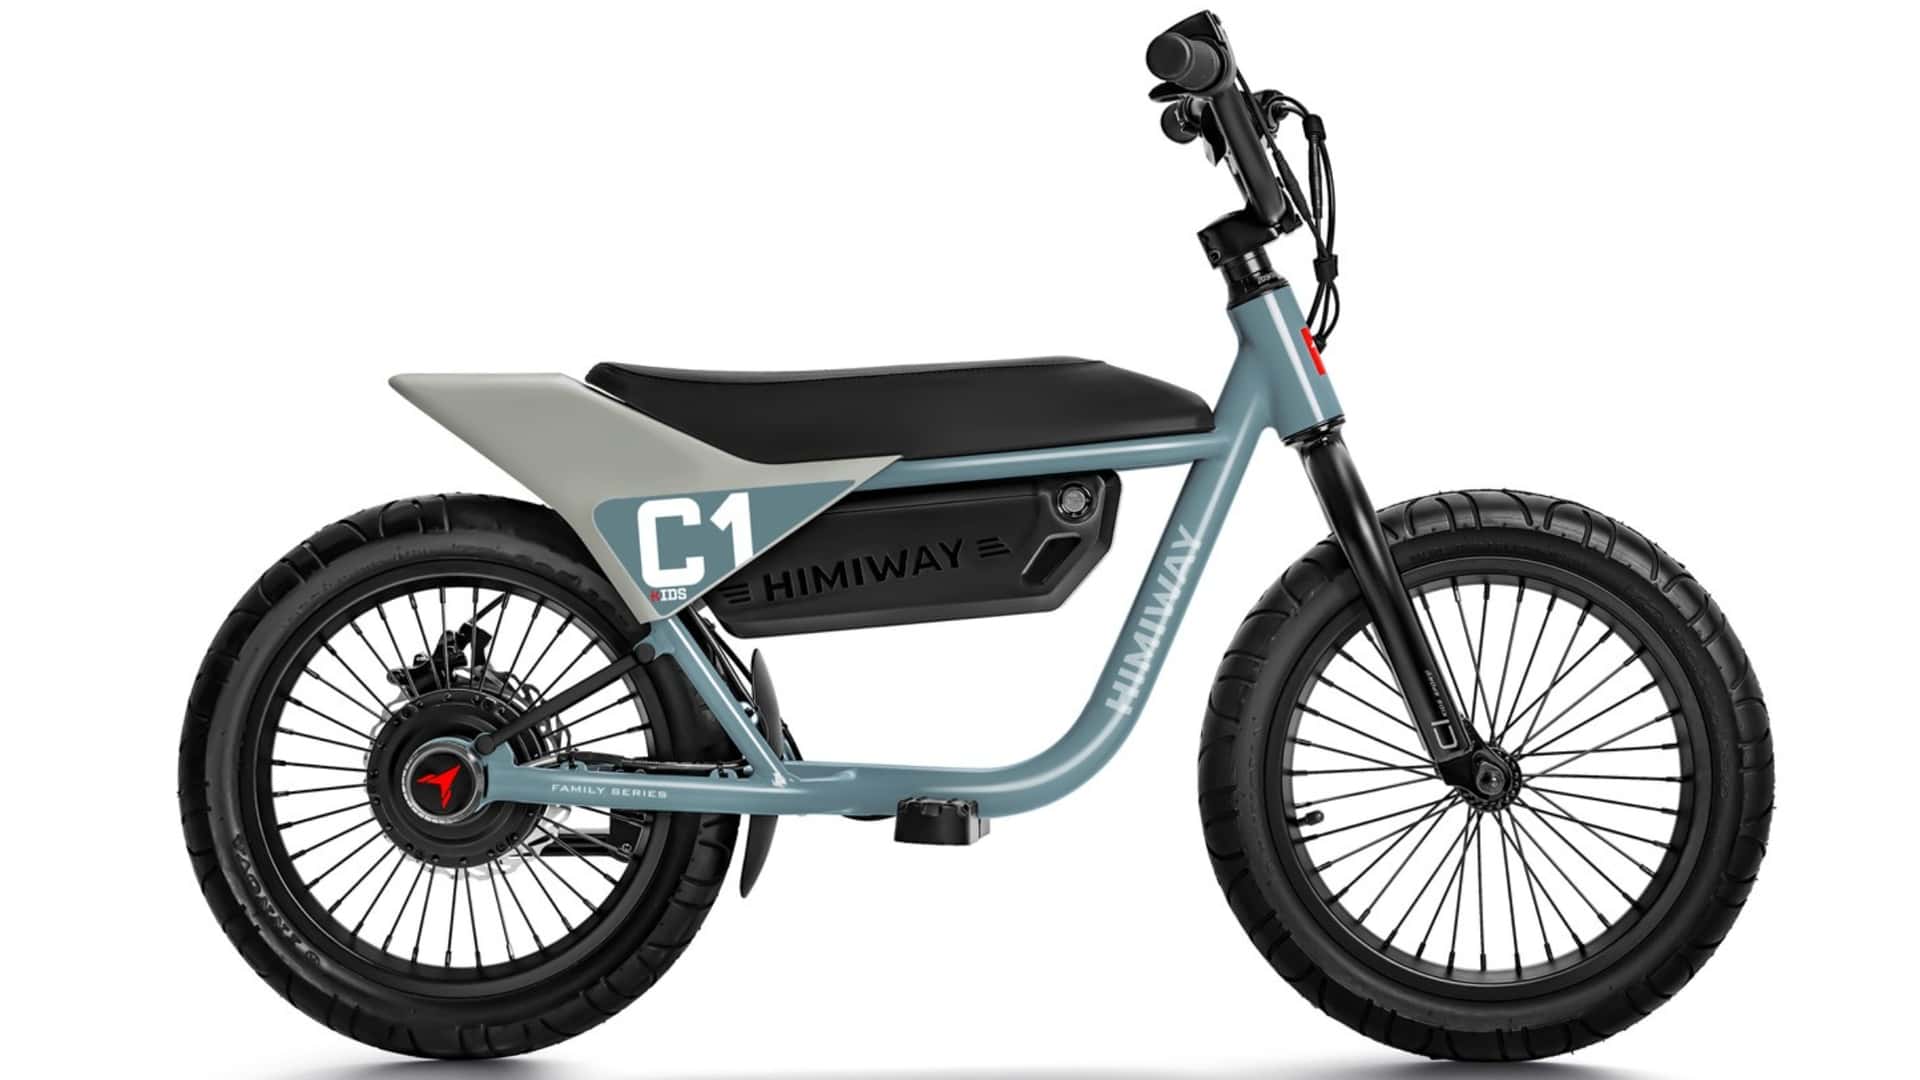 check out himiway’s new c1 electric bike made for kids